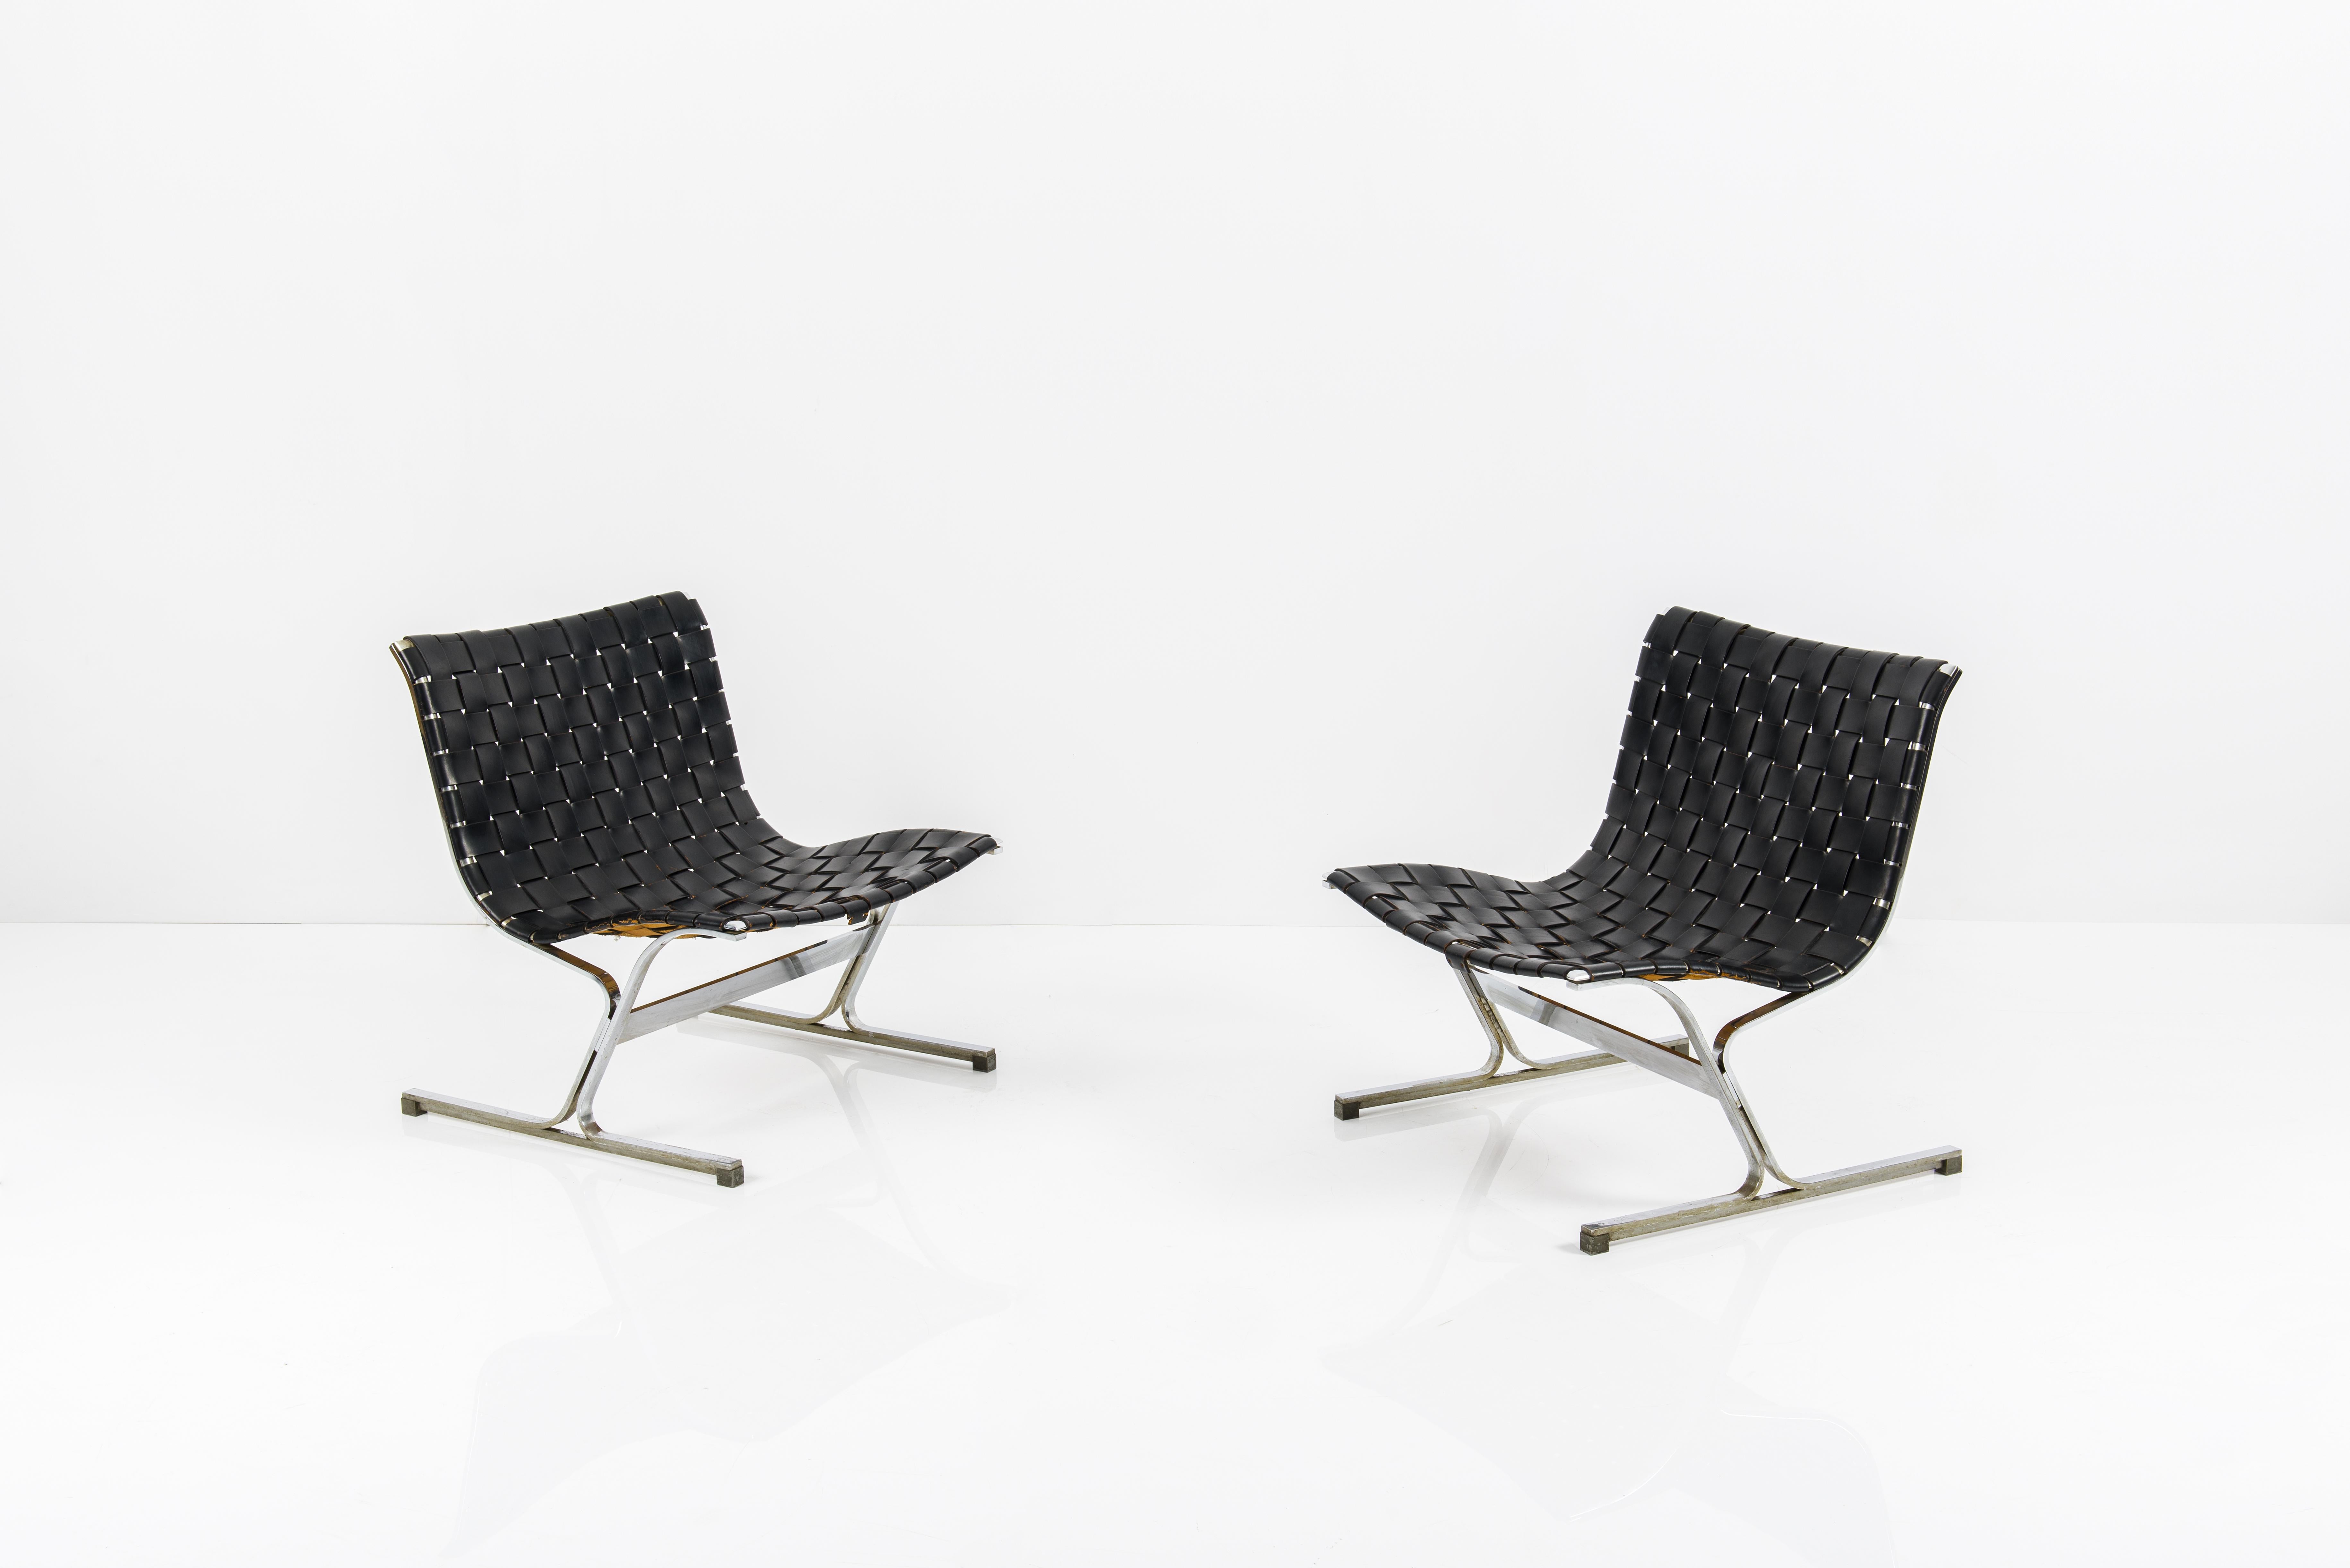 Pair of Black Leathear Lounge Chairs Designed by Ross Littel 1